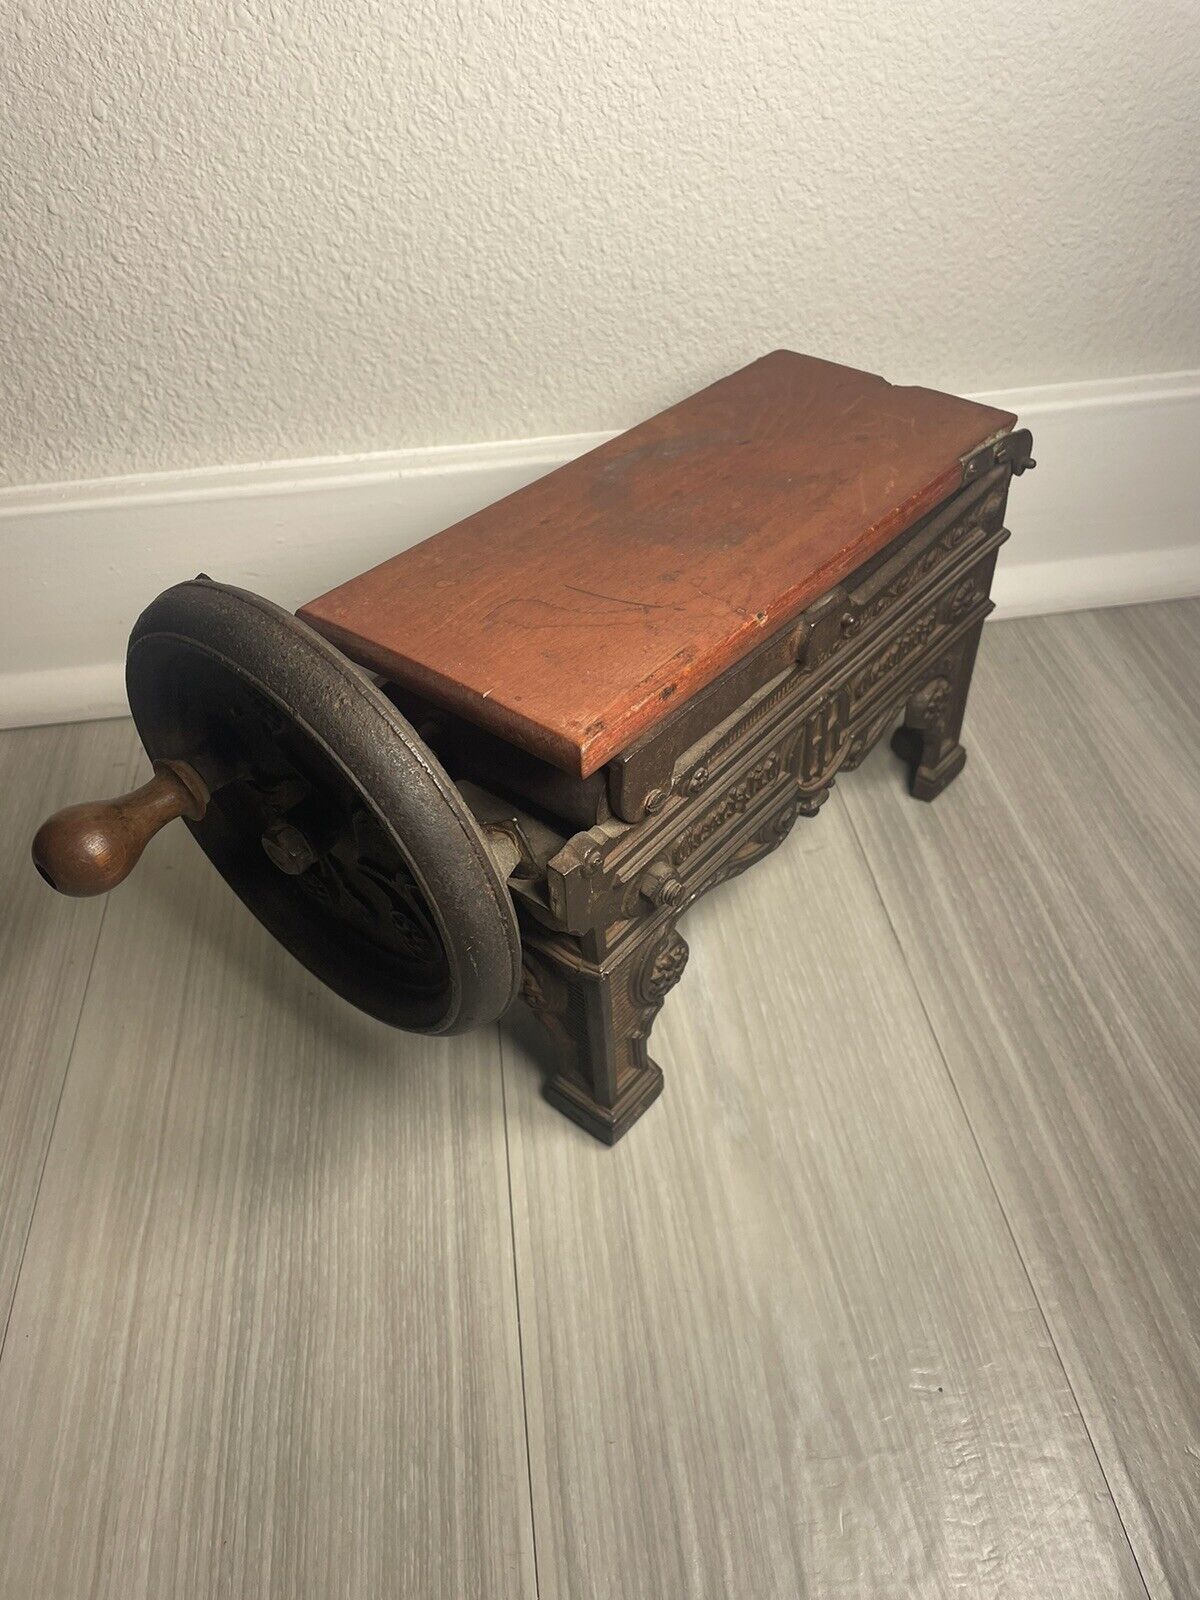 Antique Late 1800’s German Made Cast Iron/Wood Tobacco Shredder 12” x 6” x 7”